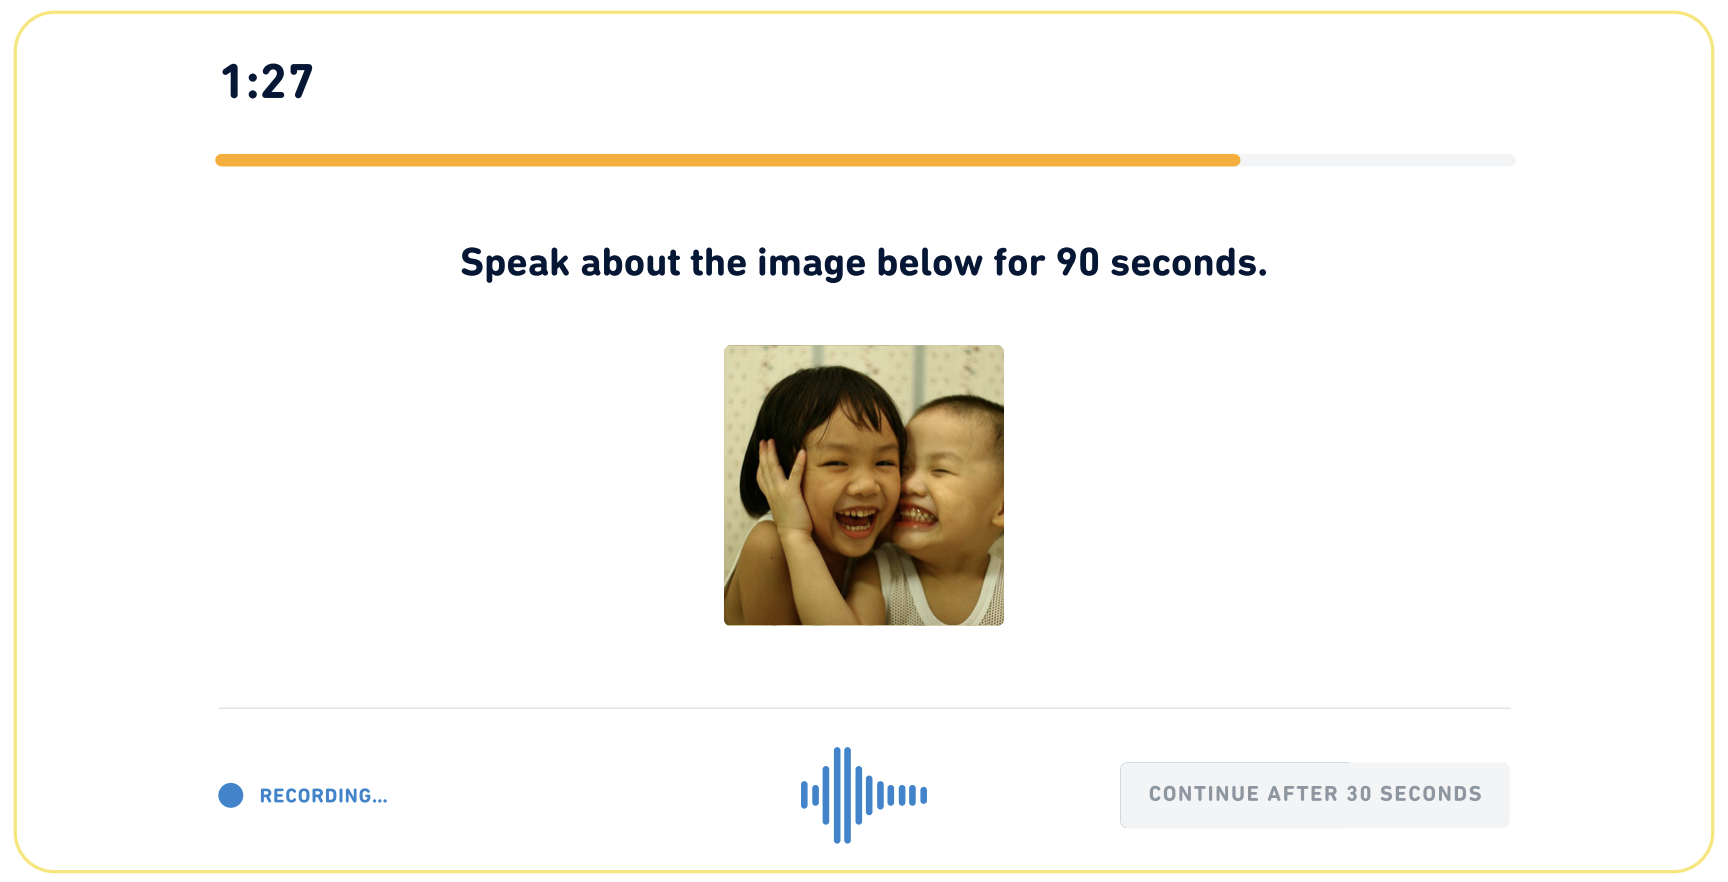 Example of a “Speak About the Photo” question from the Duolingo English Test